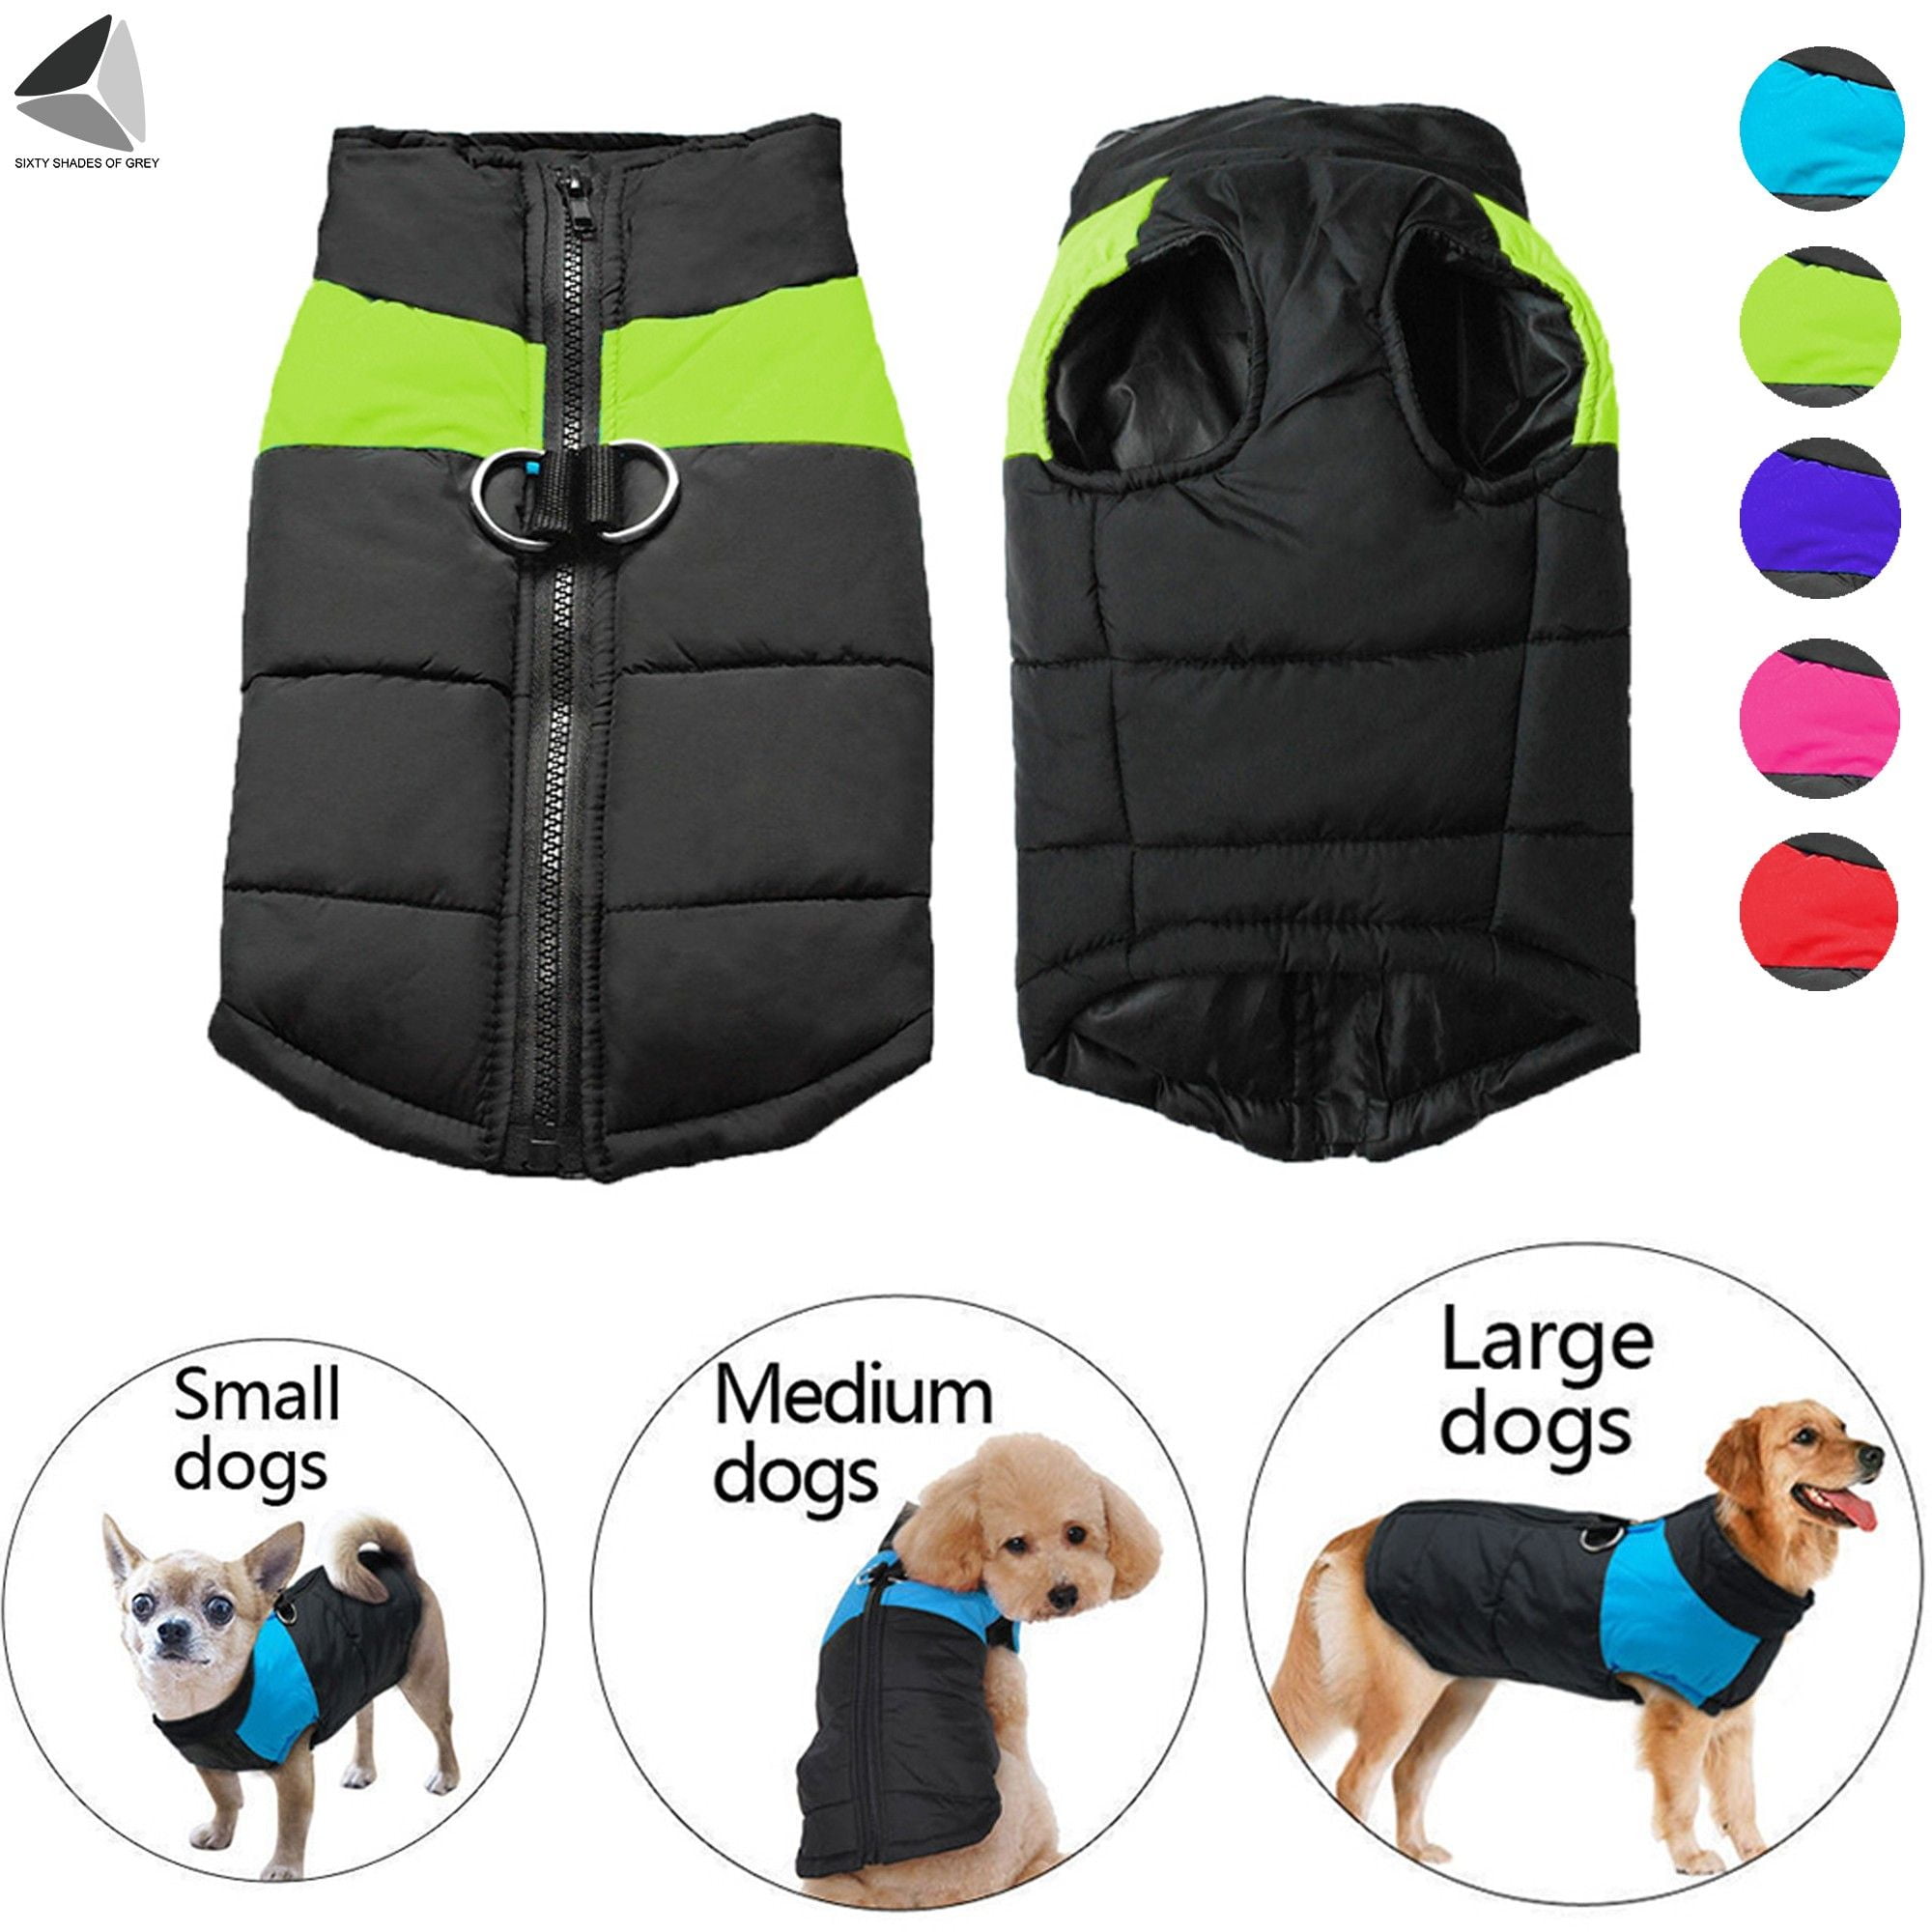 Dog Harness and Coat Zipper 2 in 1 Winter Jacket No Pull Dog Vest Harness Outfit Coats for Puppy Small Medium Dogs X-Small, Blue Dog Warm Coats Jackets